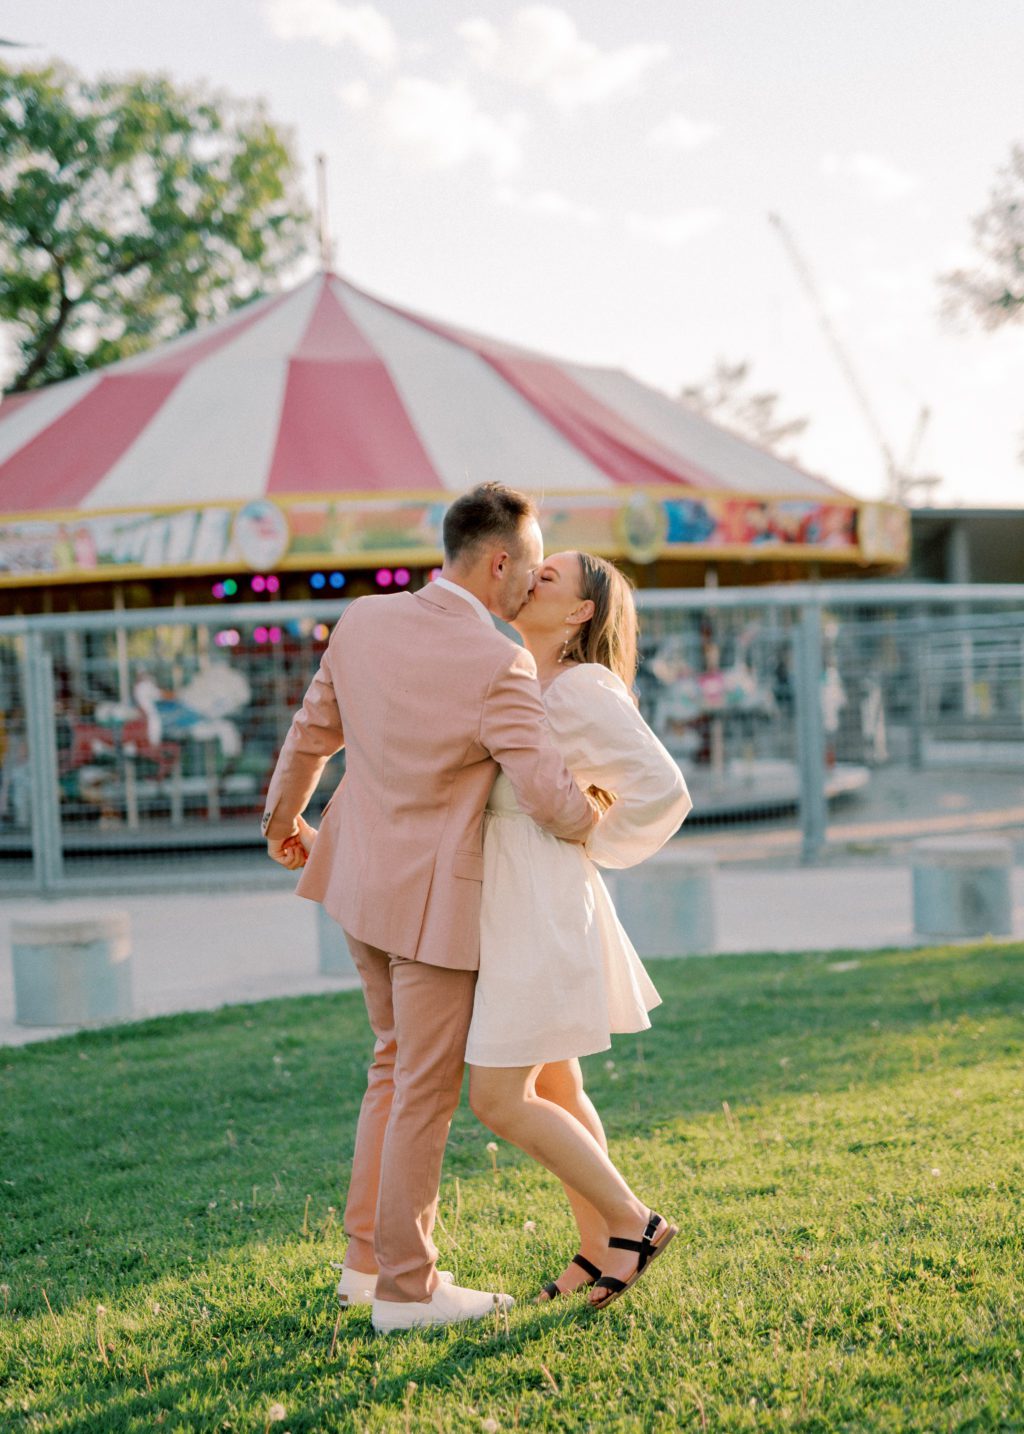 Wonderfully Whimsical Engagement Session at a Colourful Summer Carnival ...